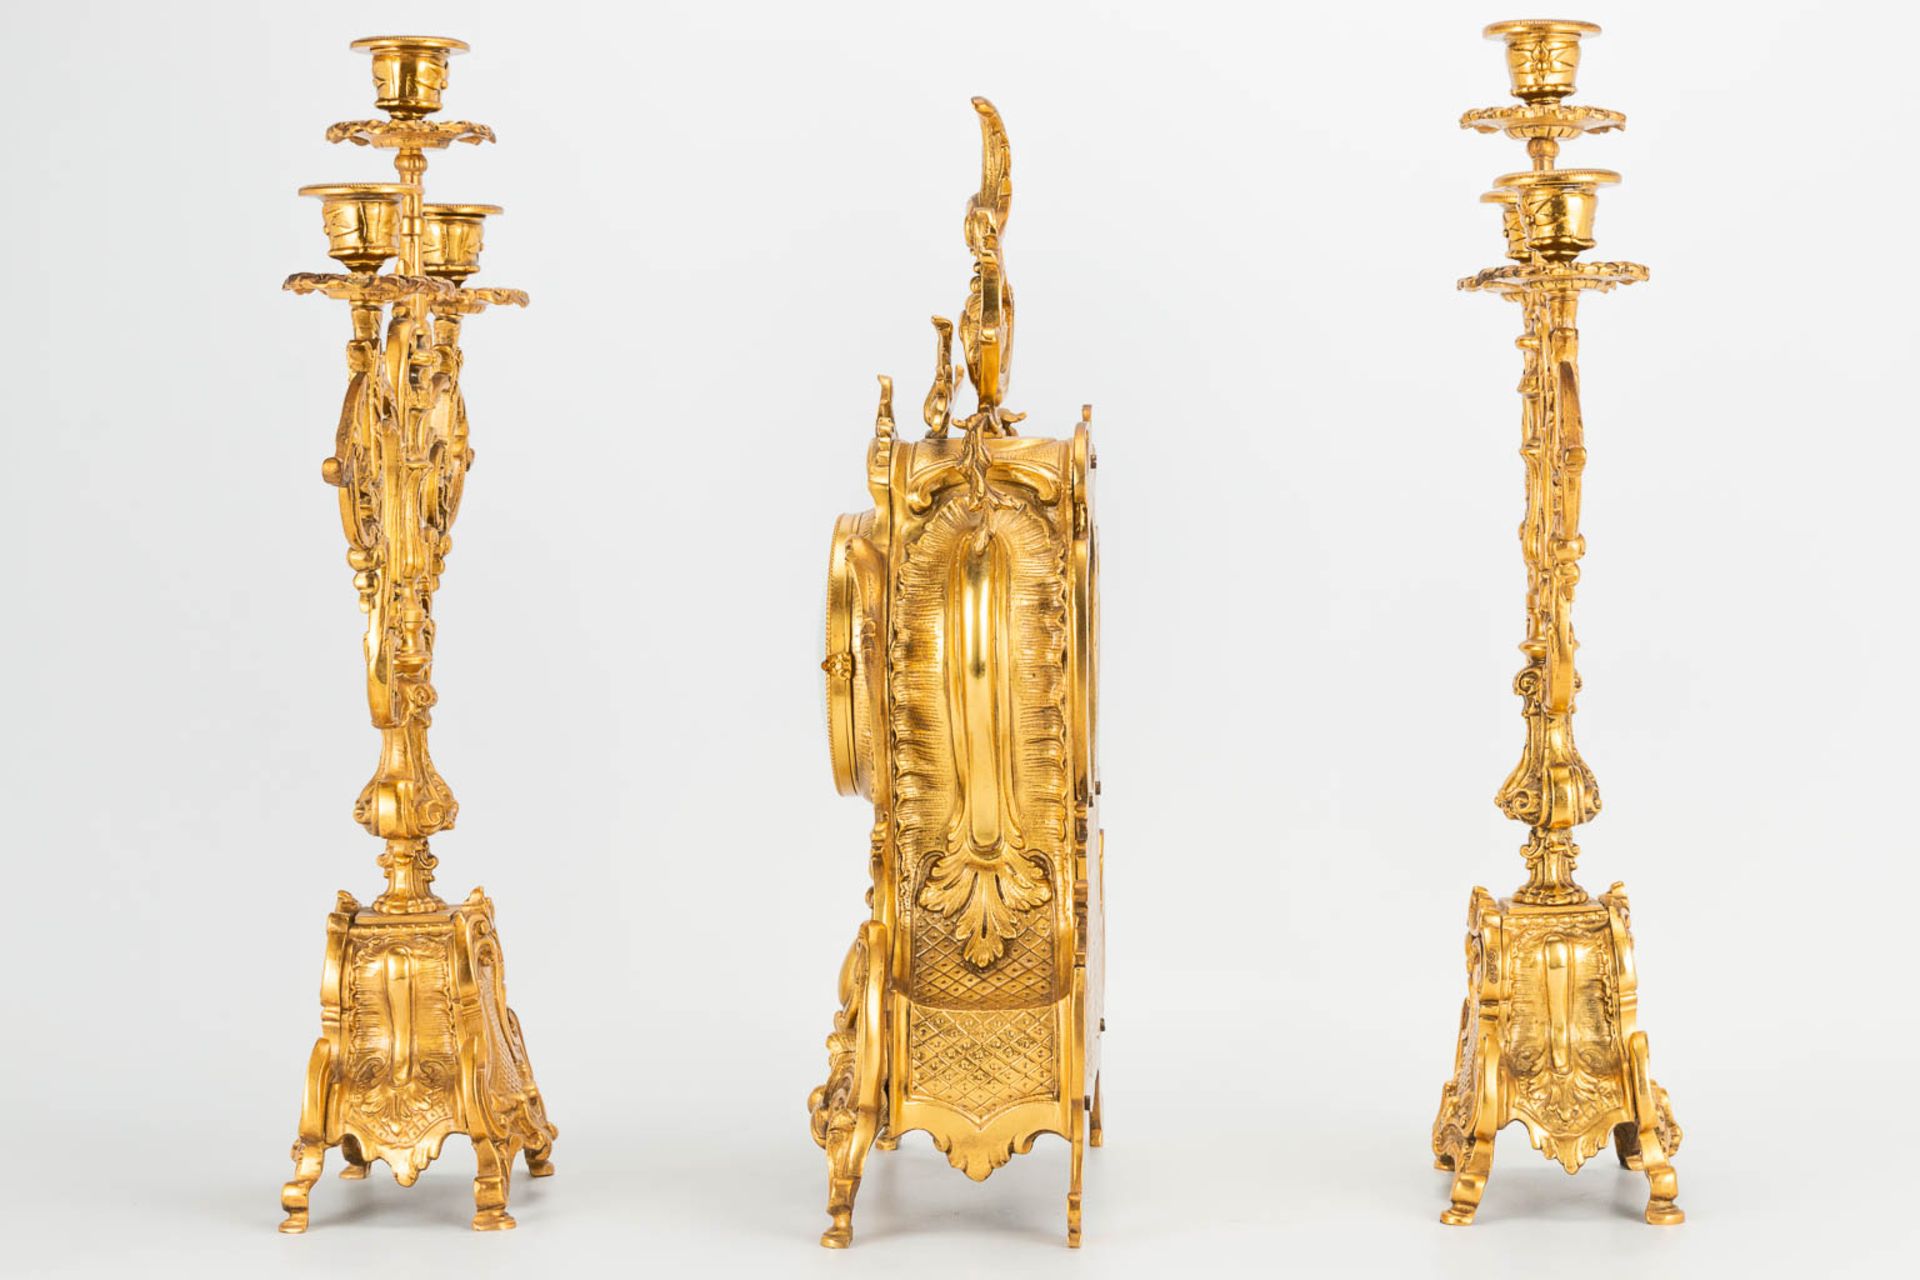 A 3 piece garniture clockset made of bronze, consisting of a clock and 2 candelabra. (9 x 22 x 41 cm - Image 5 of 17